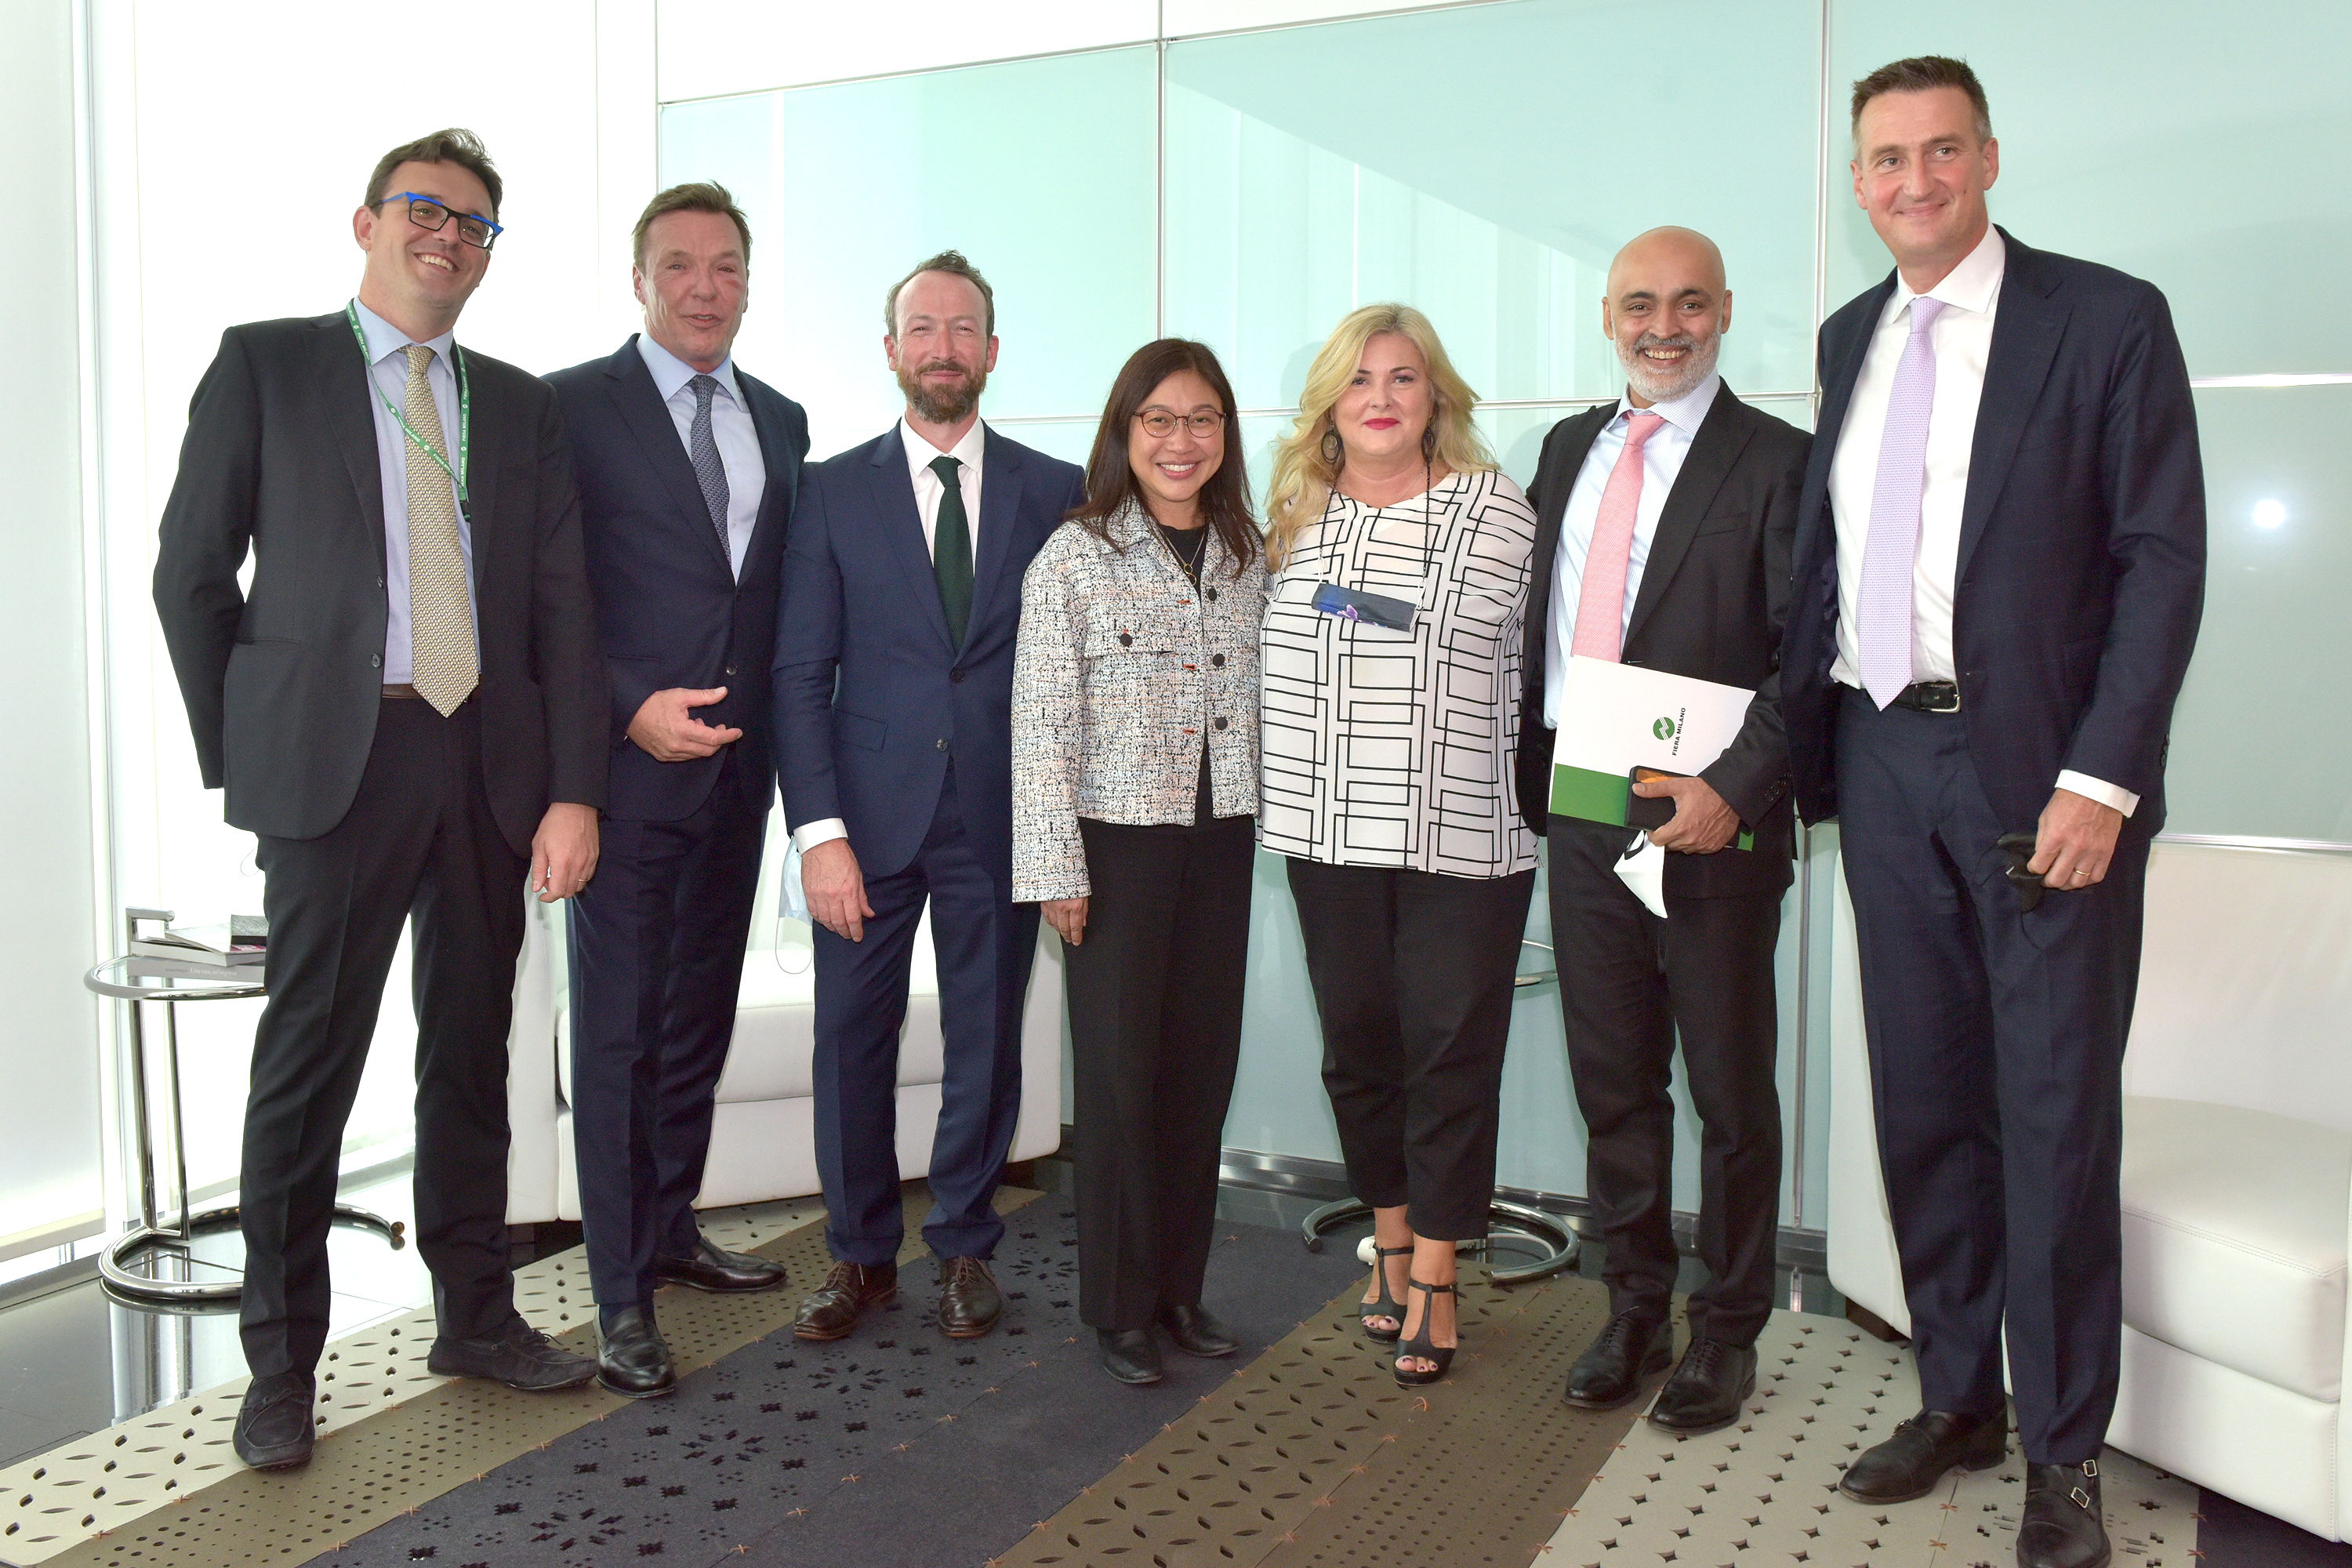 Carrie Kwik, Executive Director, Europe, Singapore Tourism Board (4th from left), representing Singapore at the MOU Signing at the opening of Salone del Mobile, Milan on Sept 5, 2021. Credit: Fiera Milano.